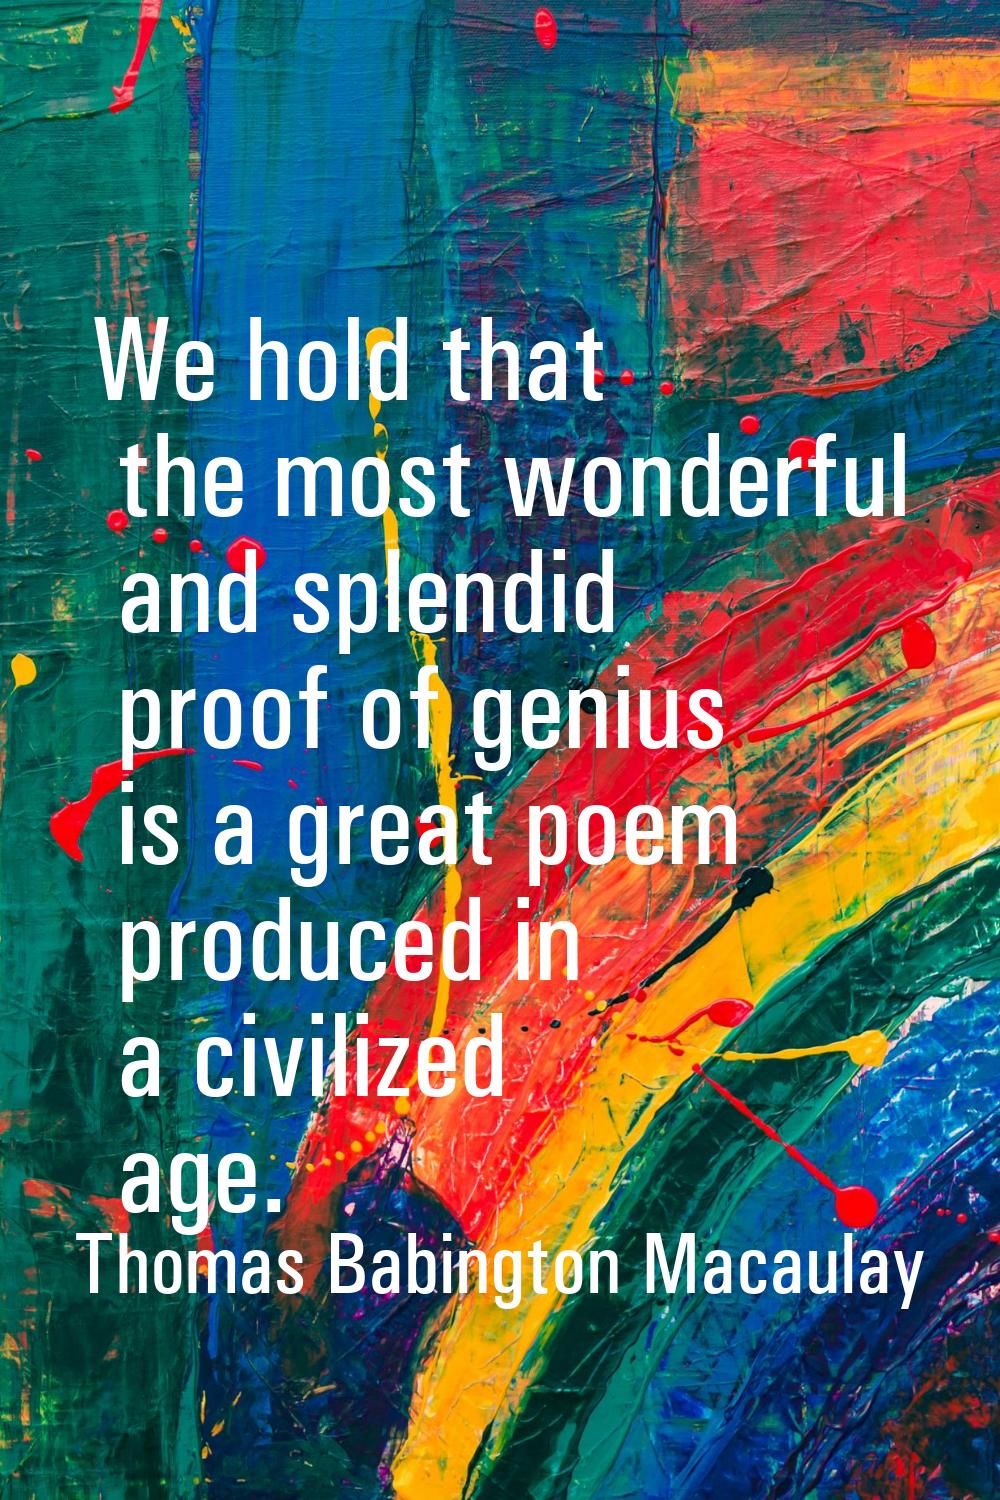 We hold that the most wonderful and splendid proof of genius is a great poem produced in a civilize